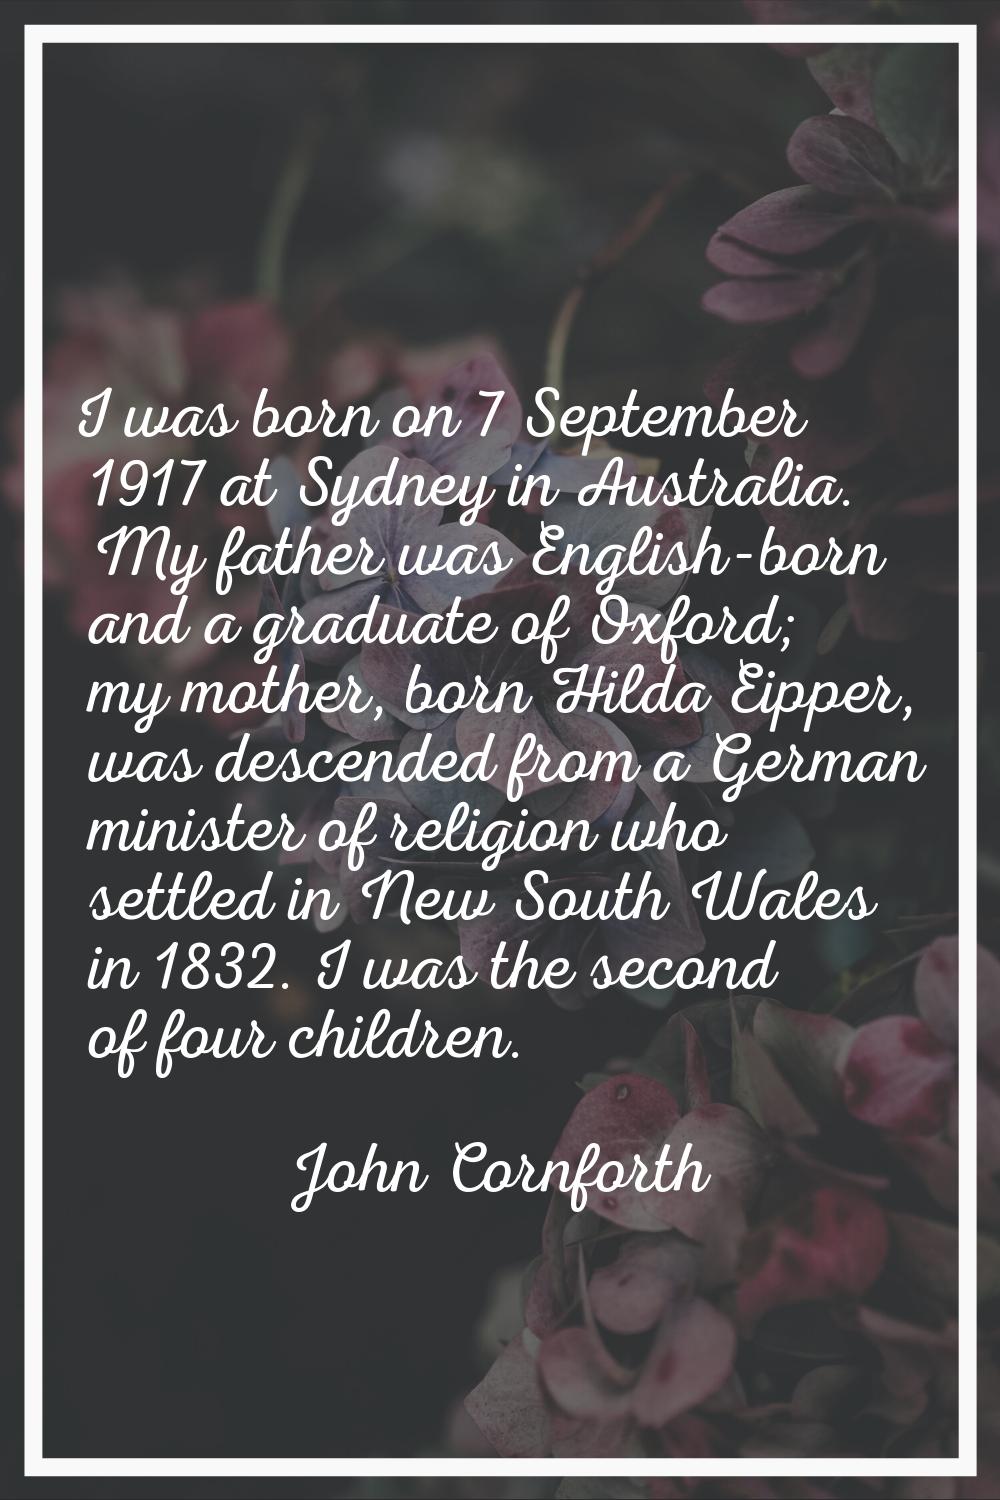 I was born on 7 September 1917 at Sydney in Australia. My father was English-born and a graduate of